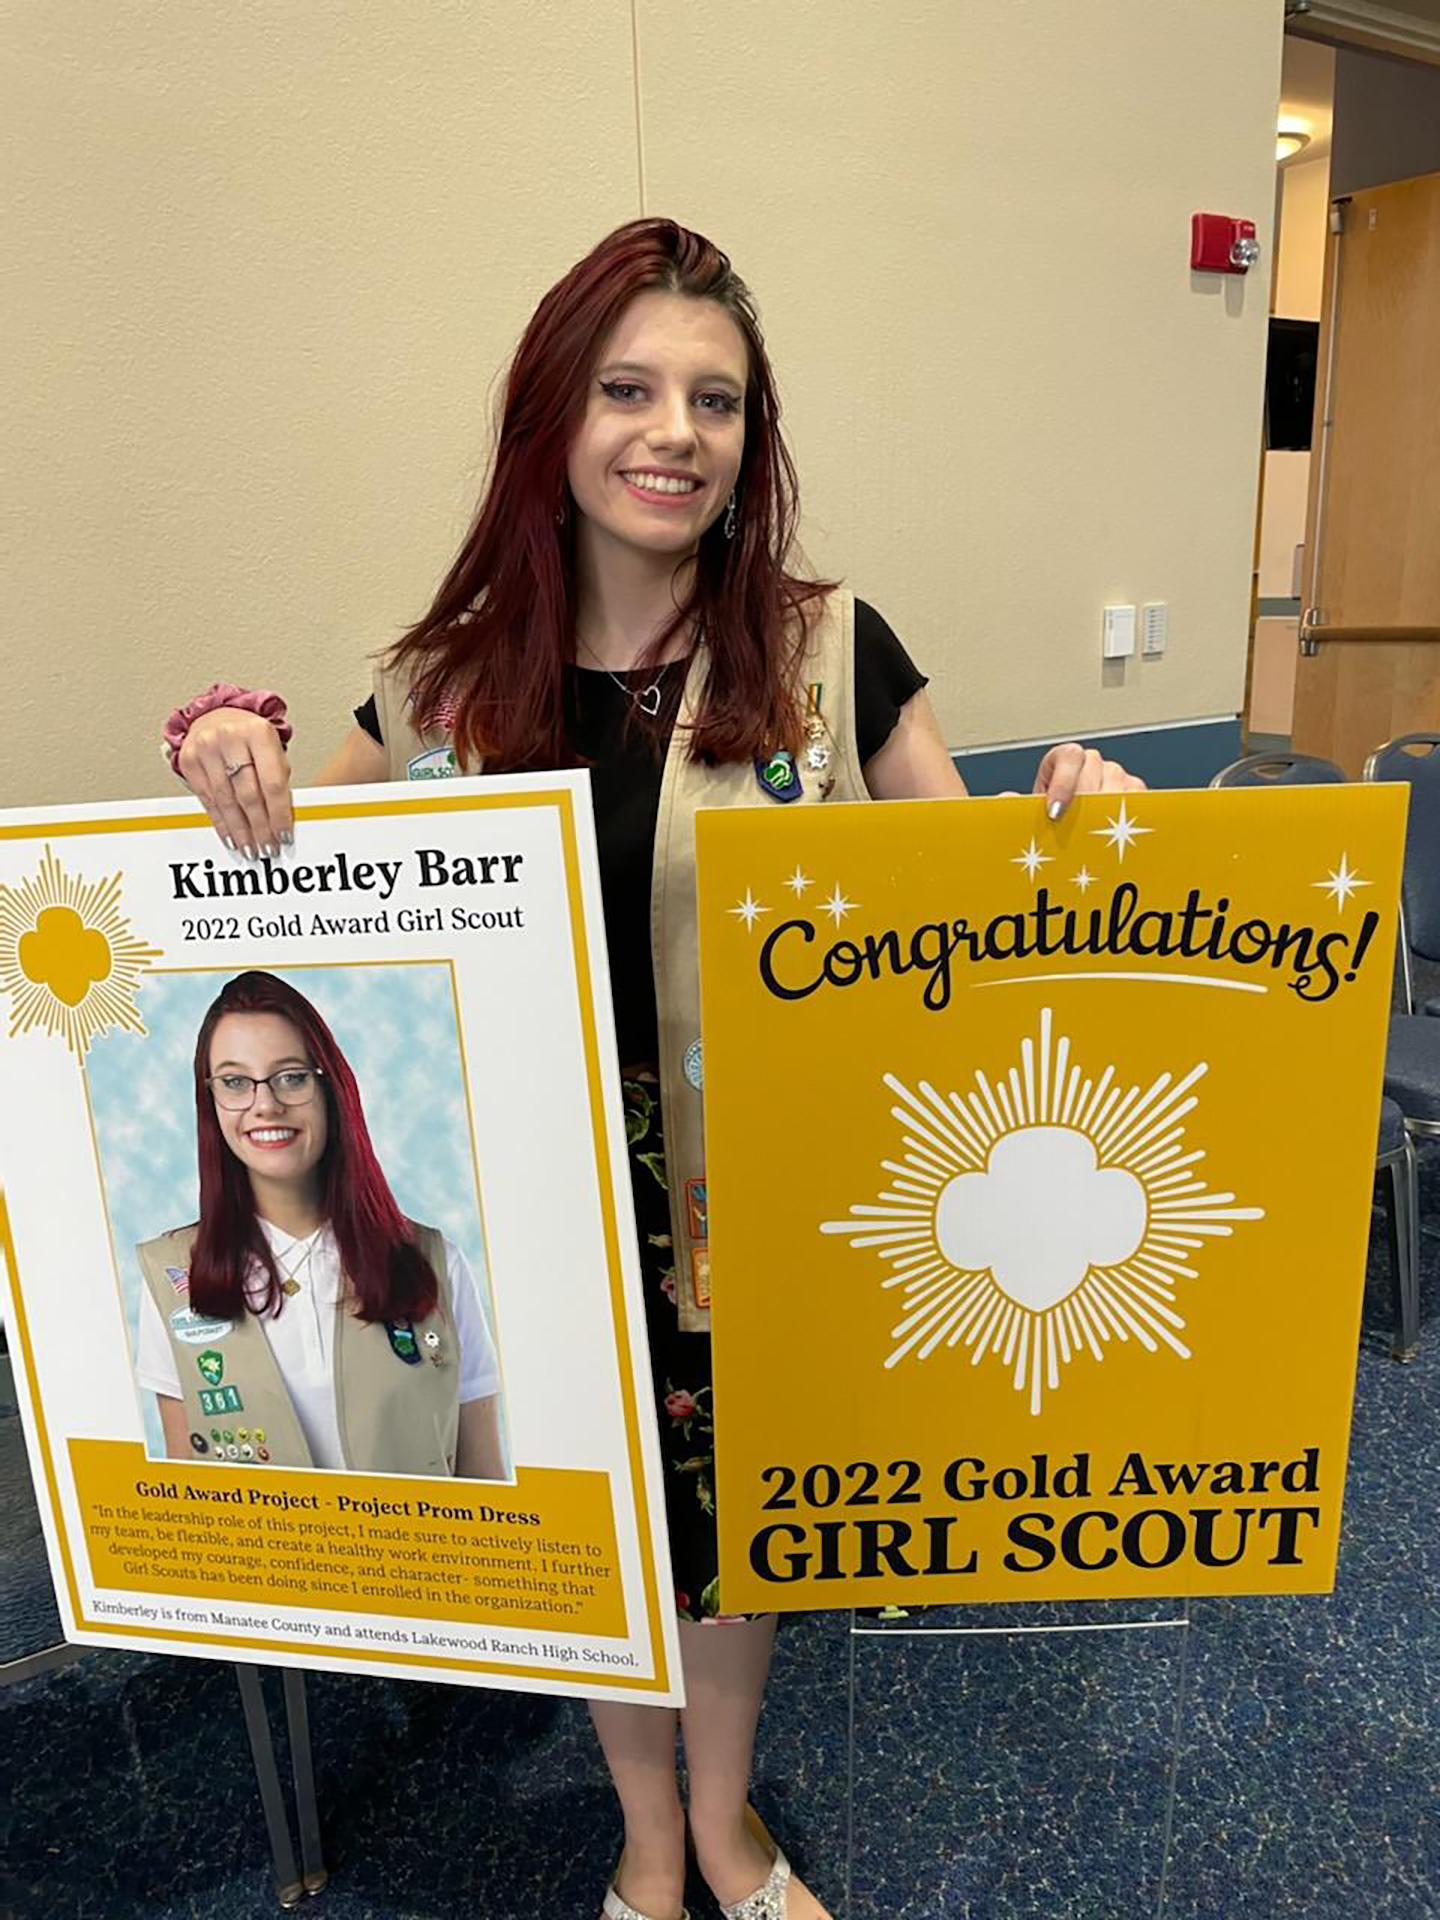 Myakka City's Kimberley Barr earns her Girl Scout Gold Award for her project, Project Prom Dress, which gave free prom attire to high school girls. Courtesy photo.